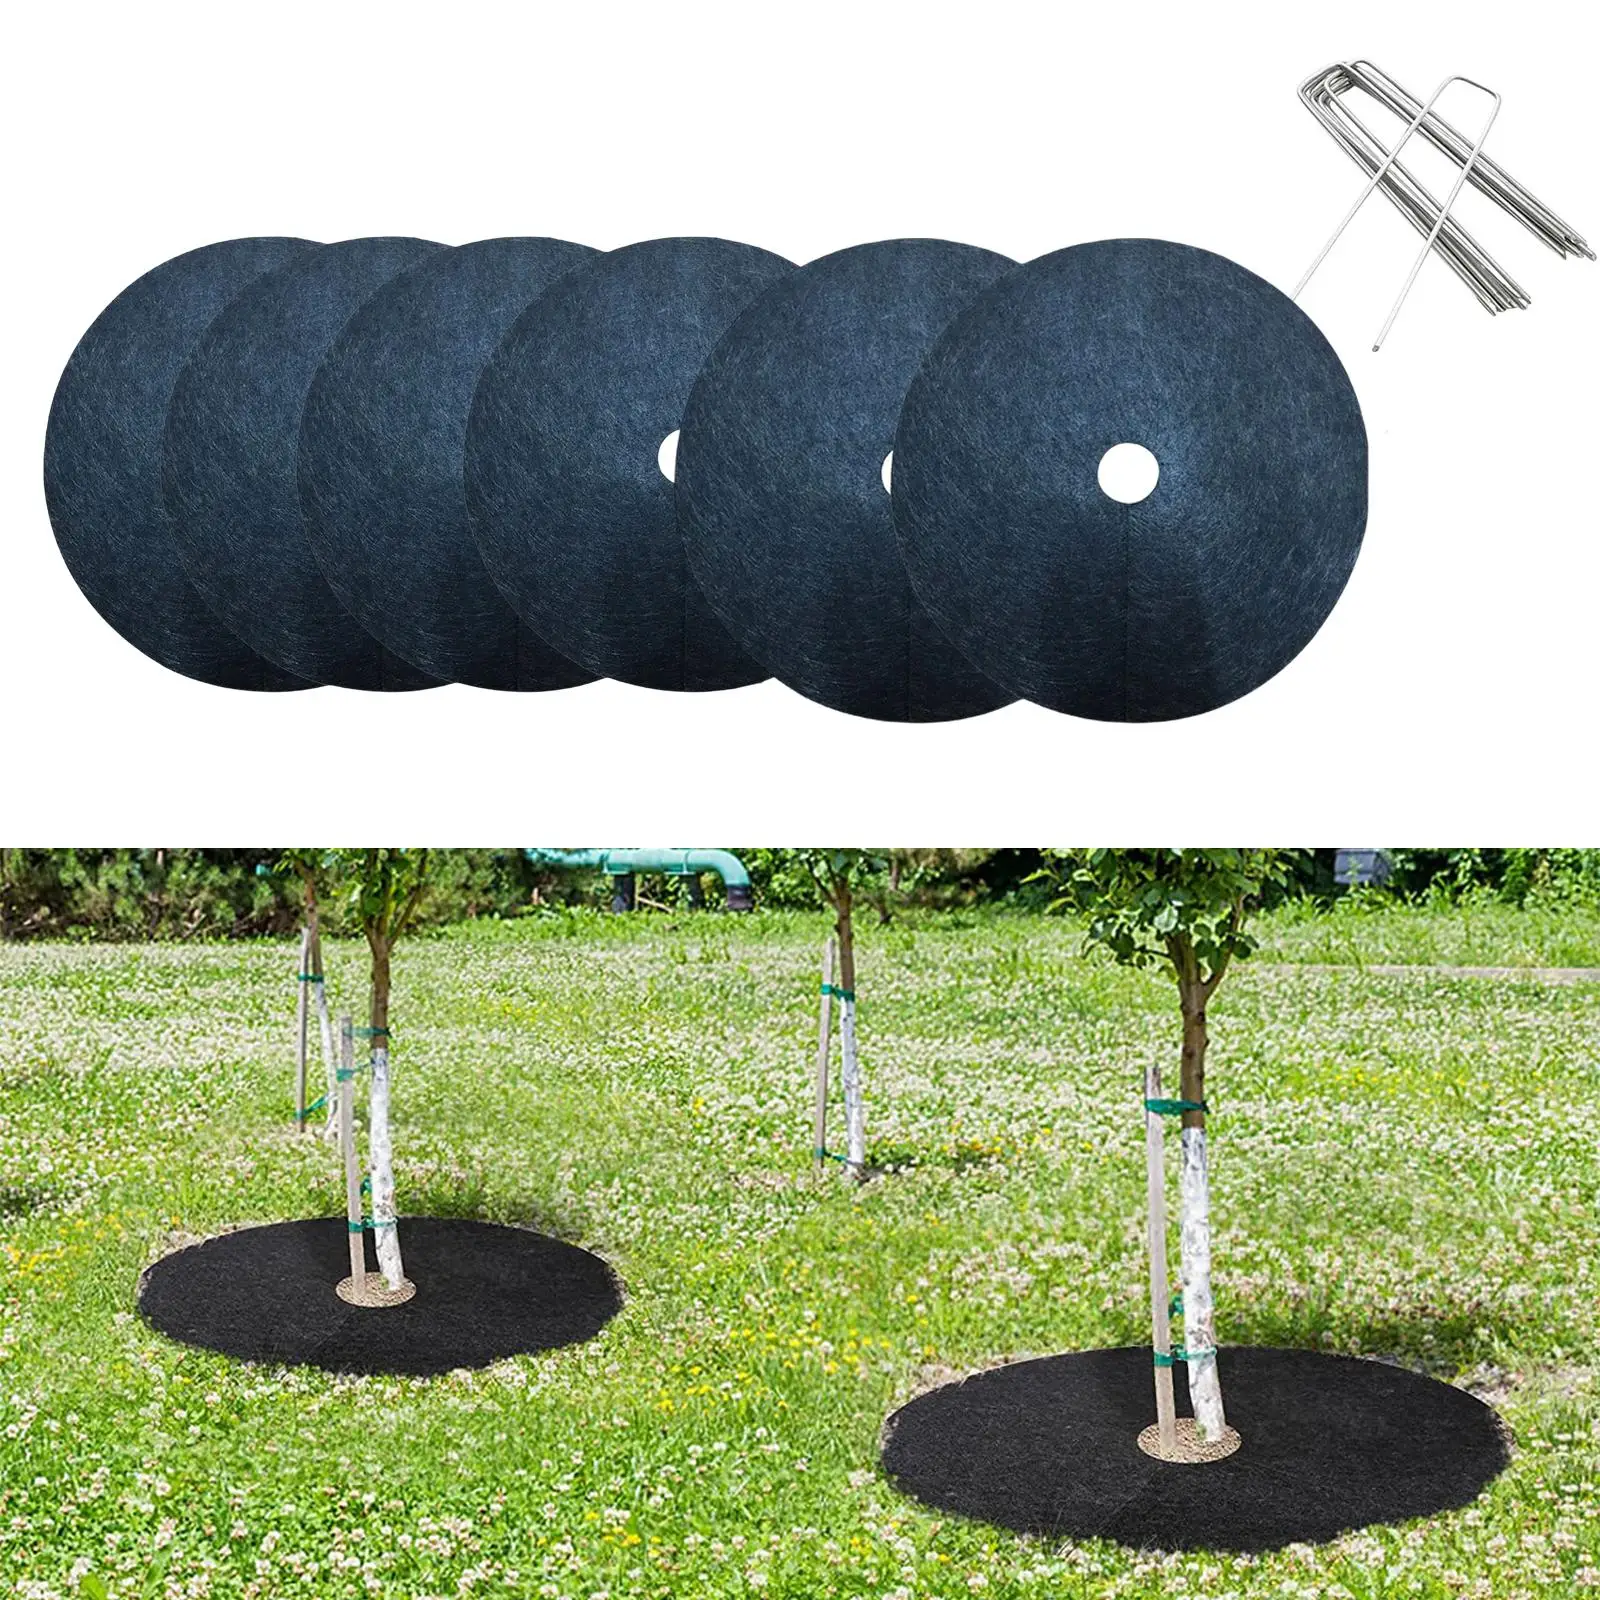 6Pcs Landscape Fabric Tree Protector Weed Barrier Mat for Outdoor Orchard